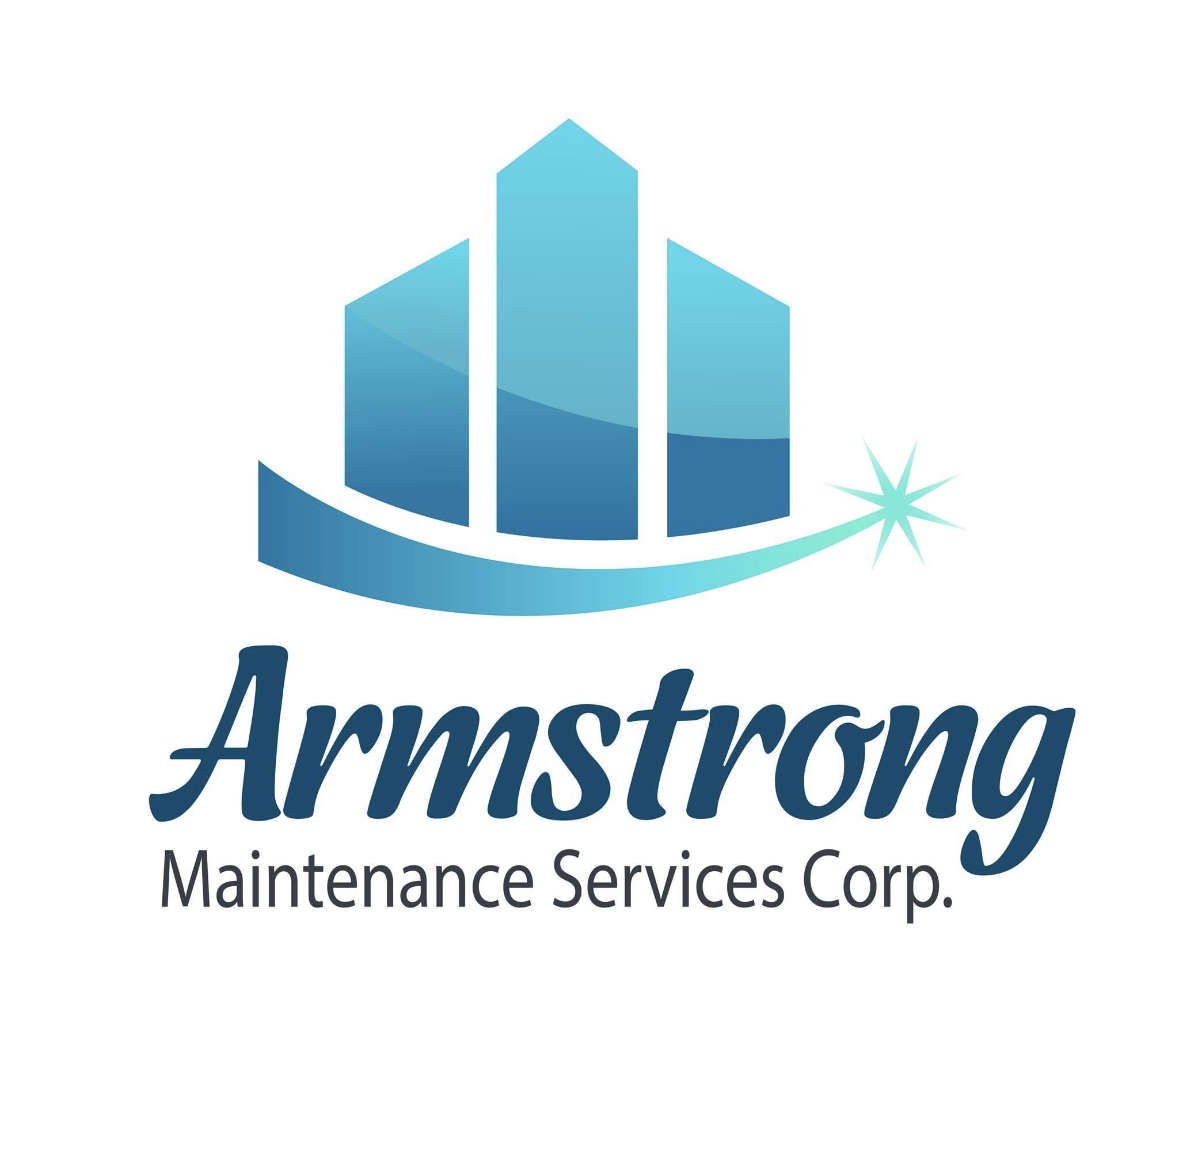 Armstrong Maintenance Services Corp Logo